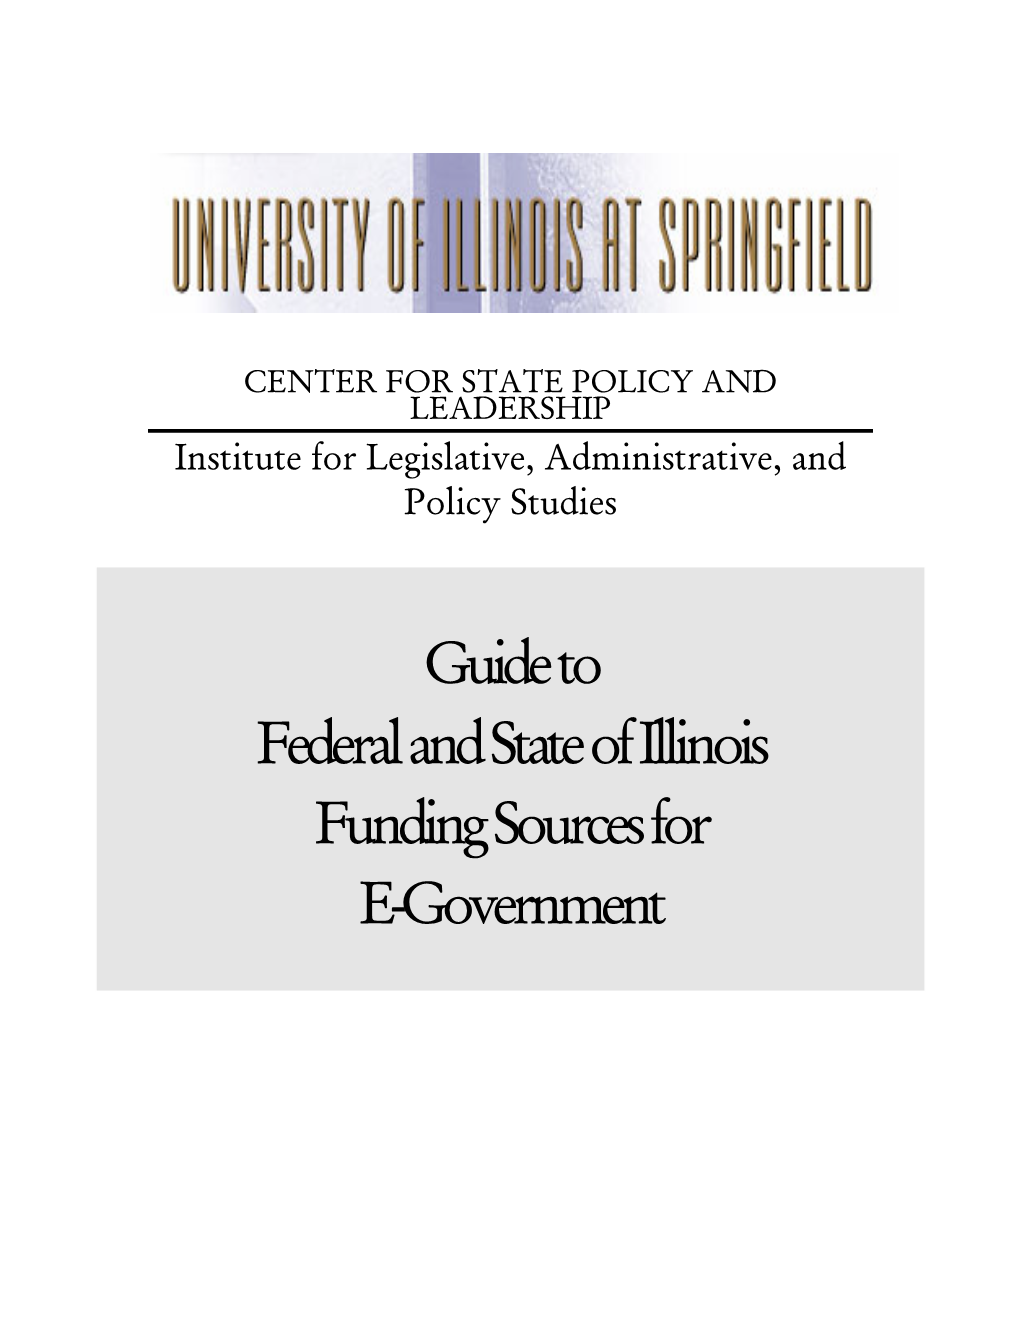 E-Government Funding Sources